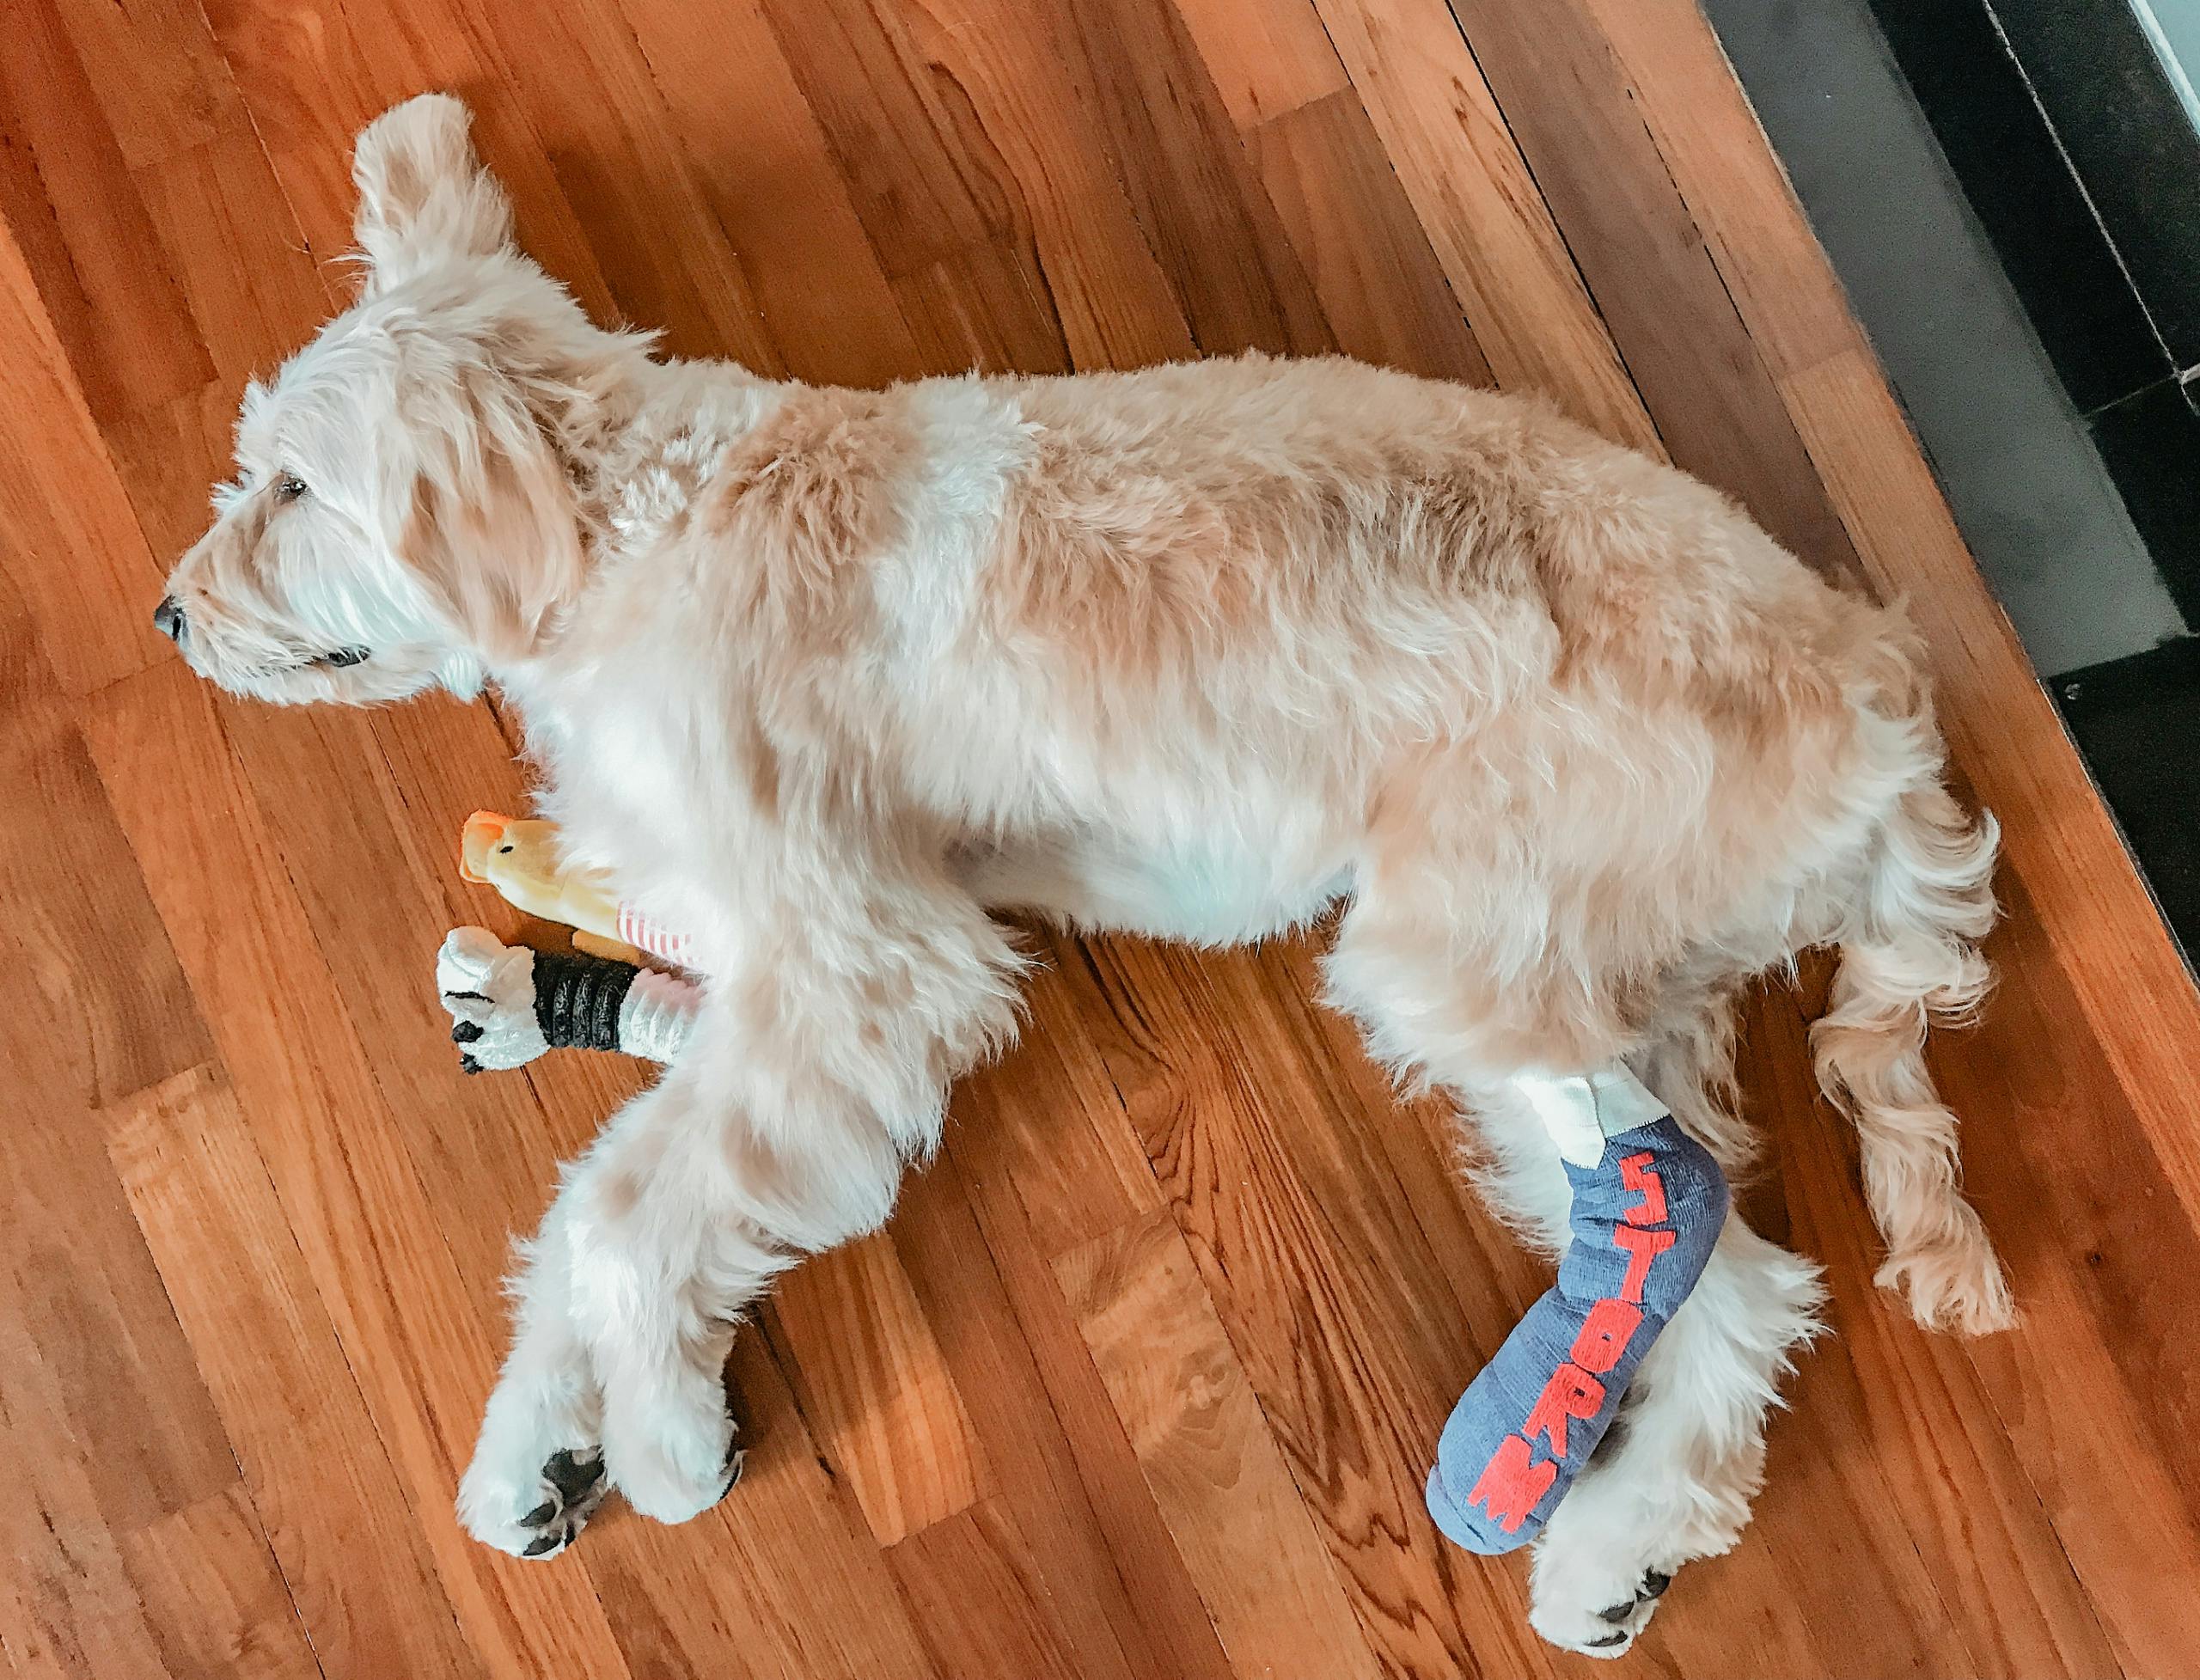 Caring for a dog with a fractured leg